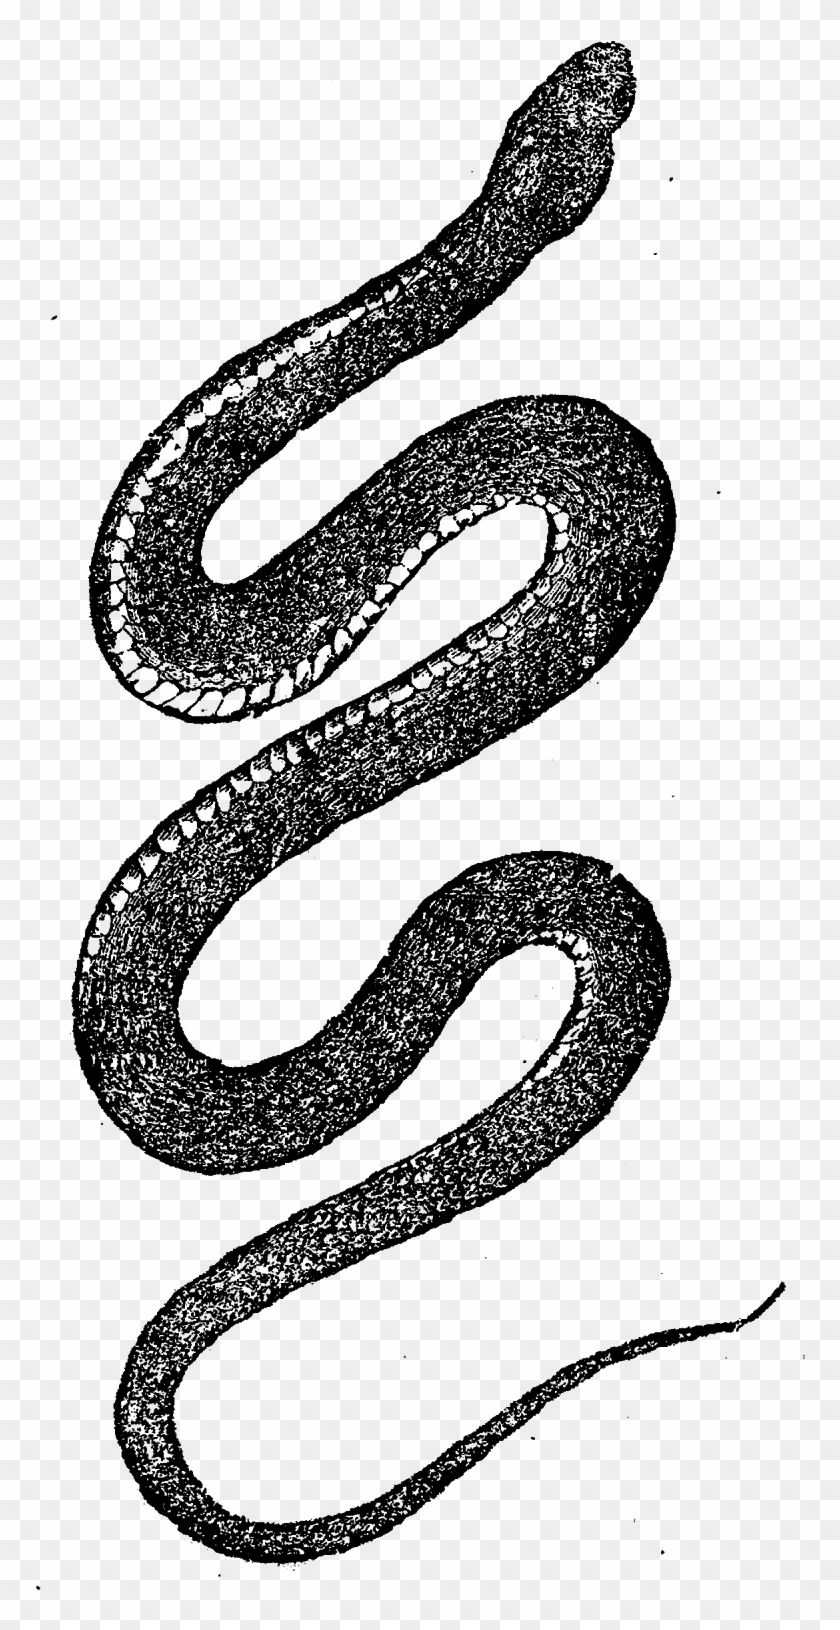 And, The Third Digital Reptile Image, Is Also Of A - Vintage Clip Art Snake - Png Download #4747781